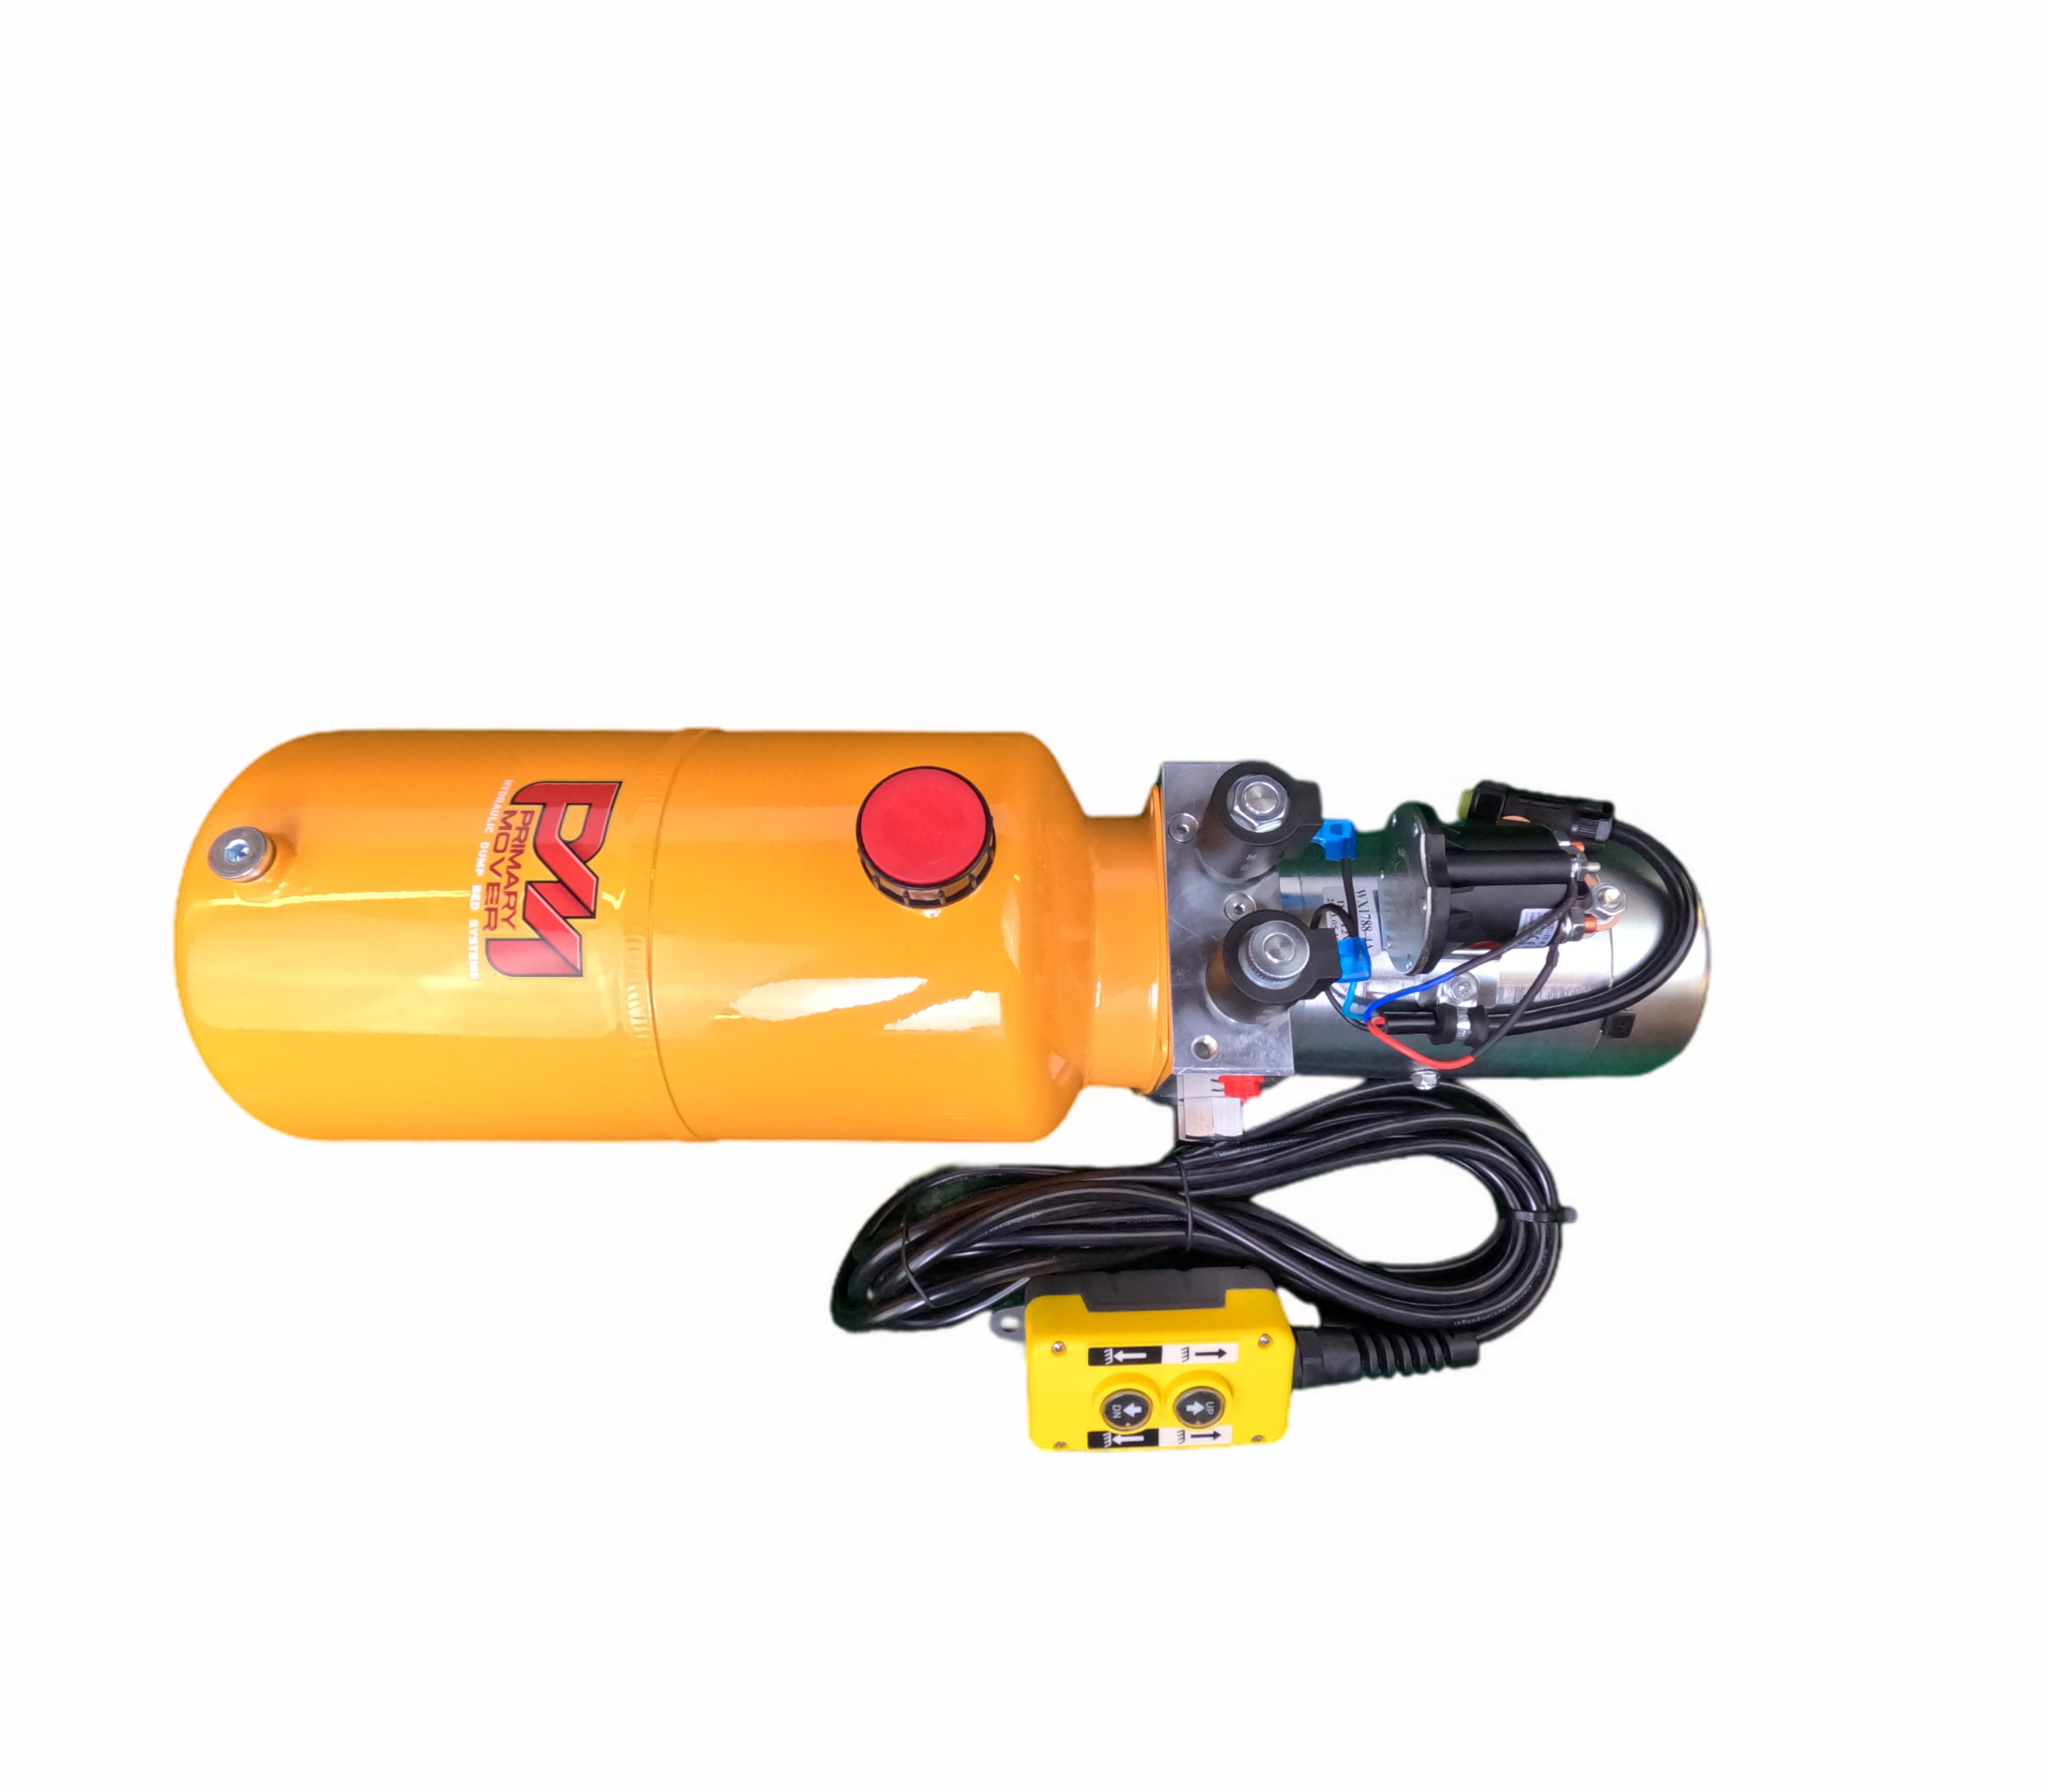 DLH 12V Double-Acting Hydraulic Pump with Steel Reservoir: Dual-acting pump with red button, black wires, and yellow cylinder for efficient dump bed operation.